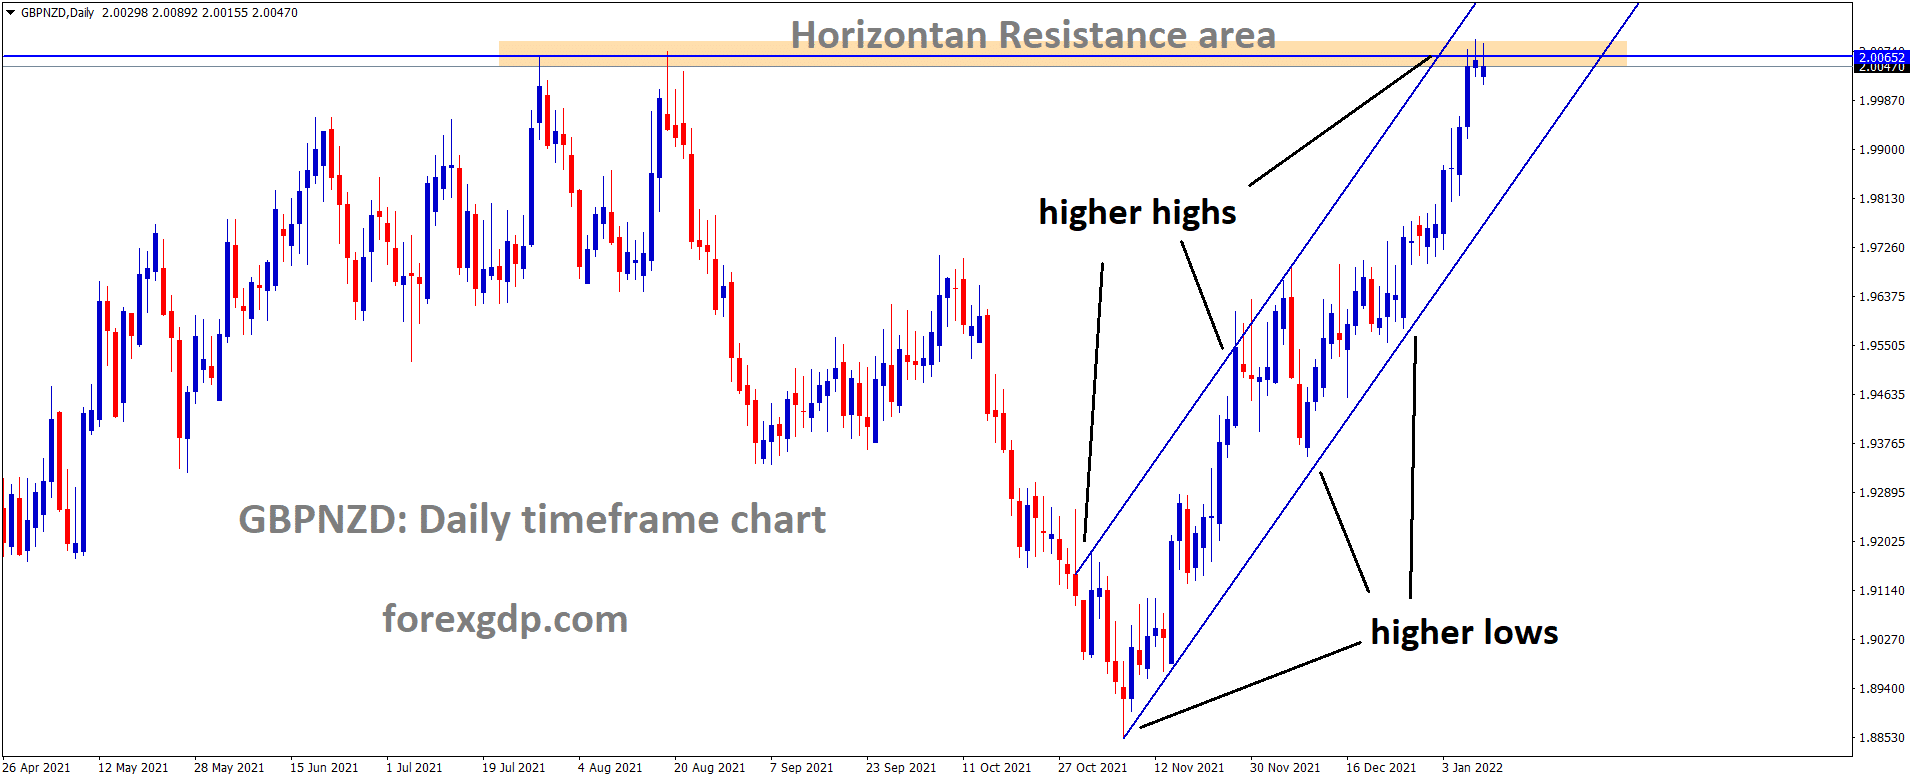 GBPNZD is moving in an Ascending channel and the market has reached the Horizontal resistance area of the Ascending channel pattern